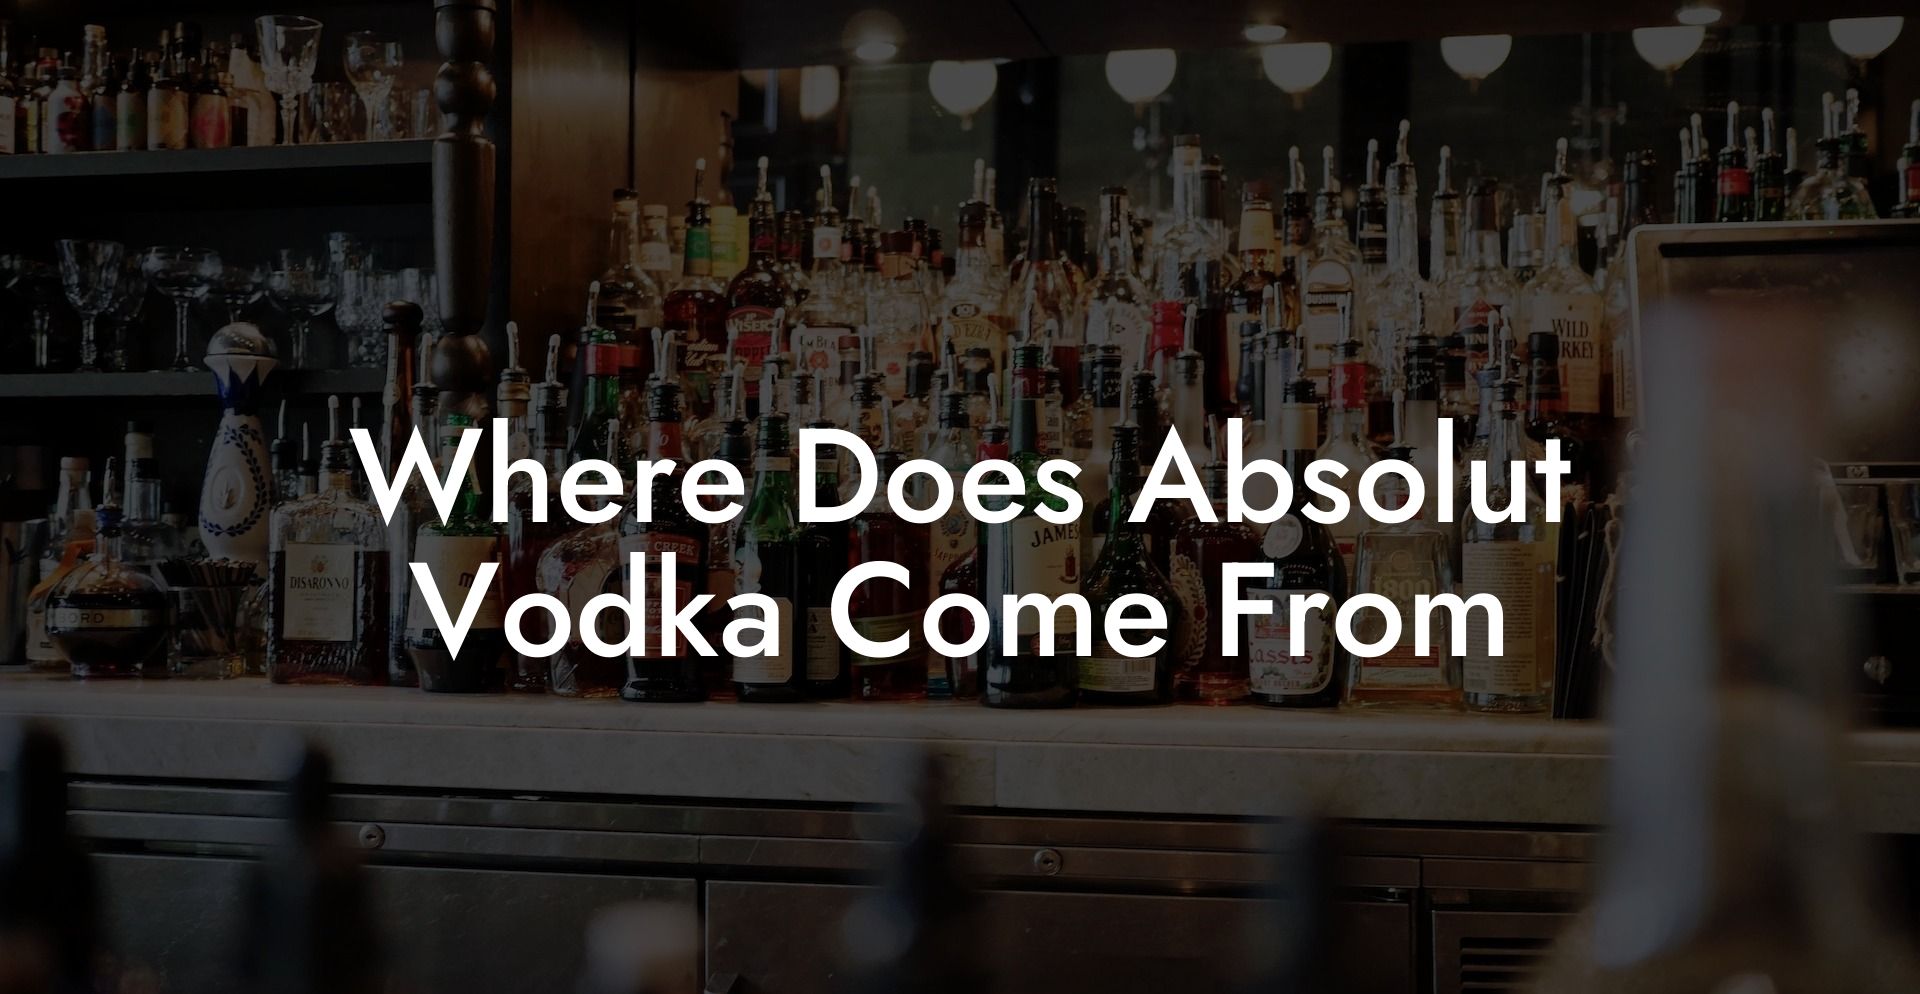 Where Does Absolut Vodka Come From